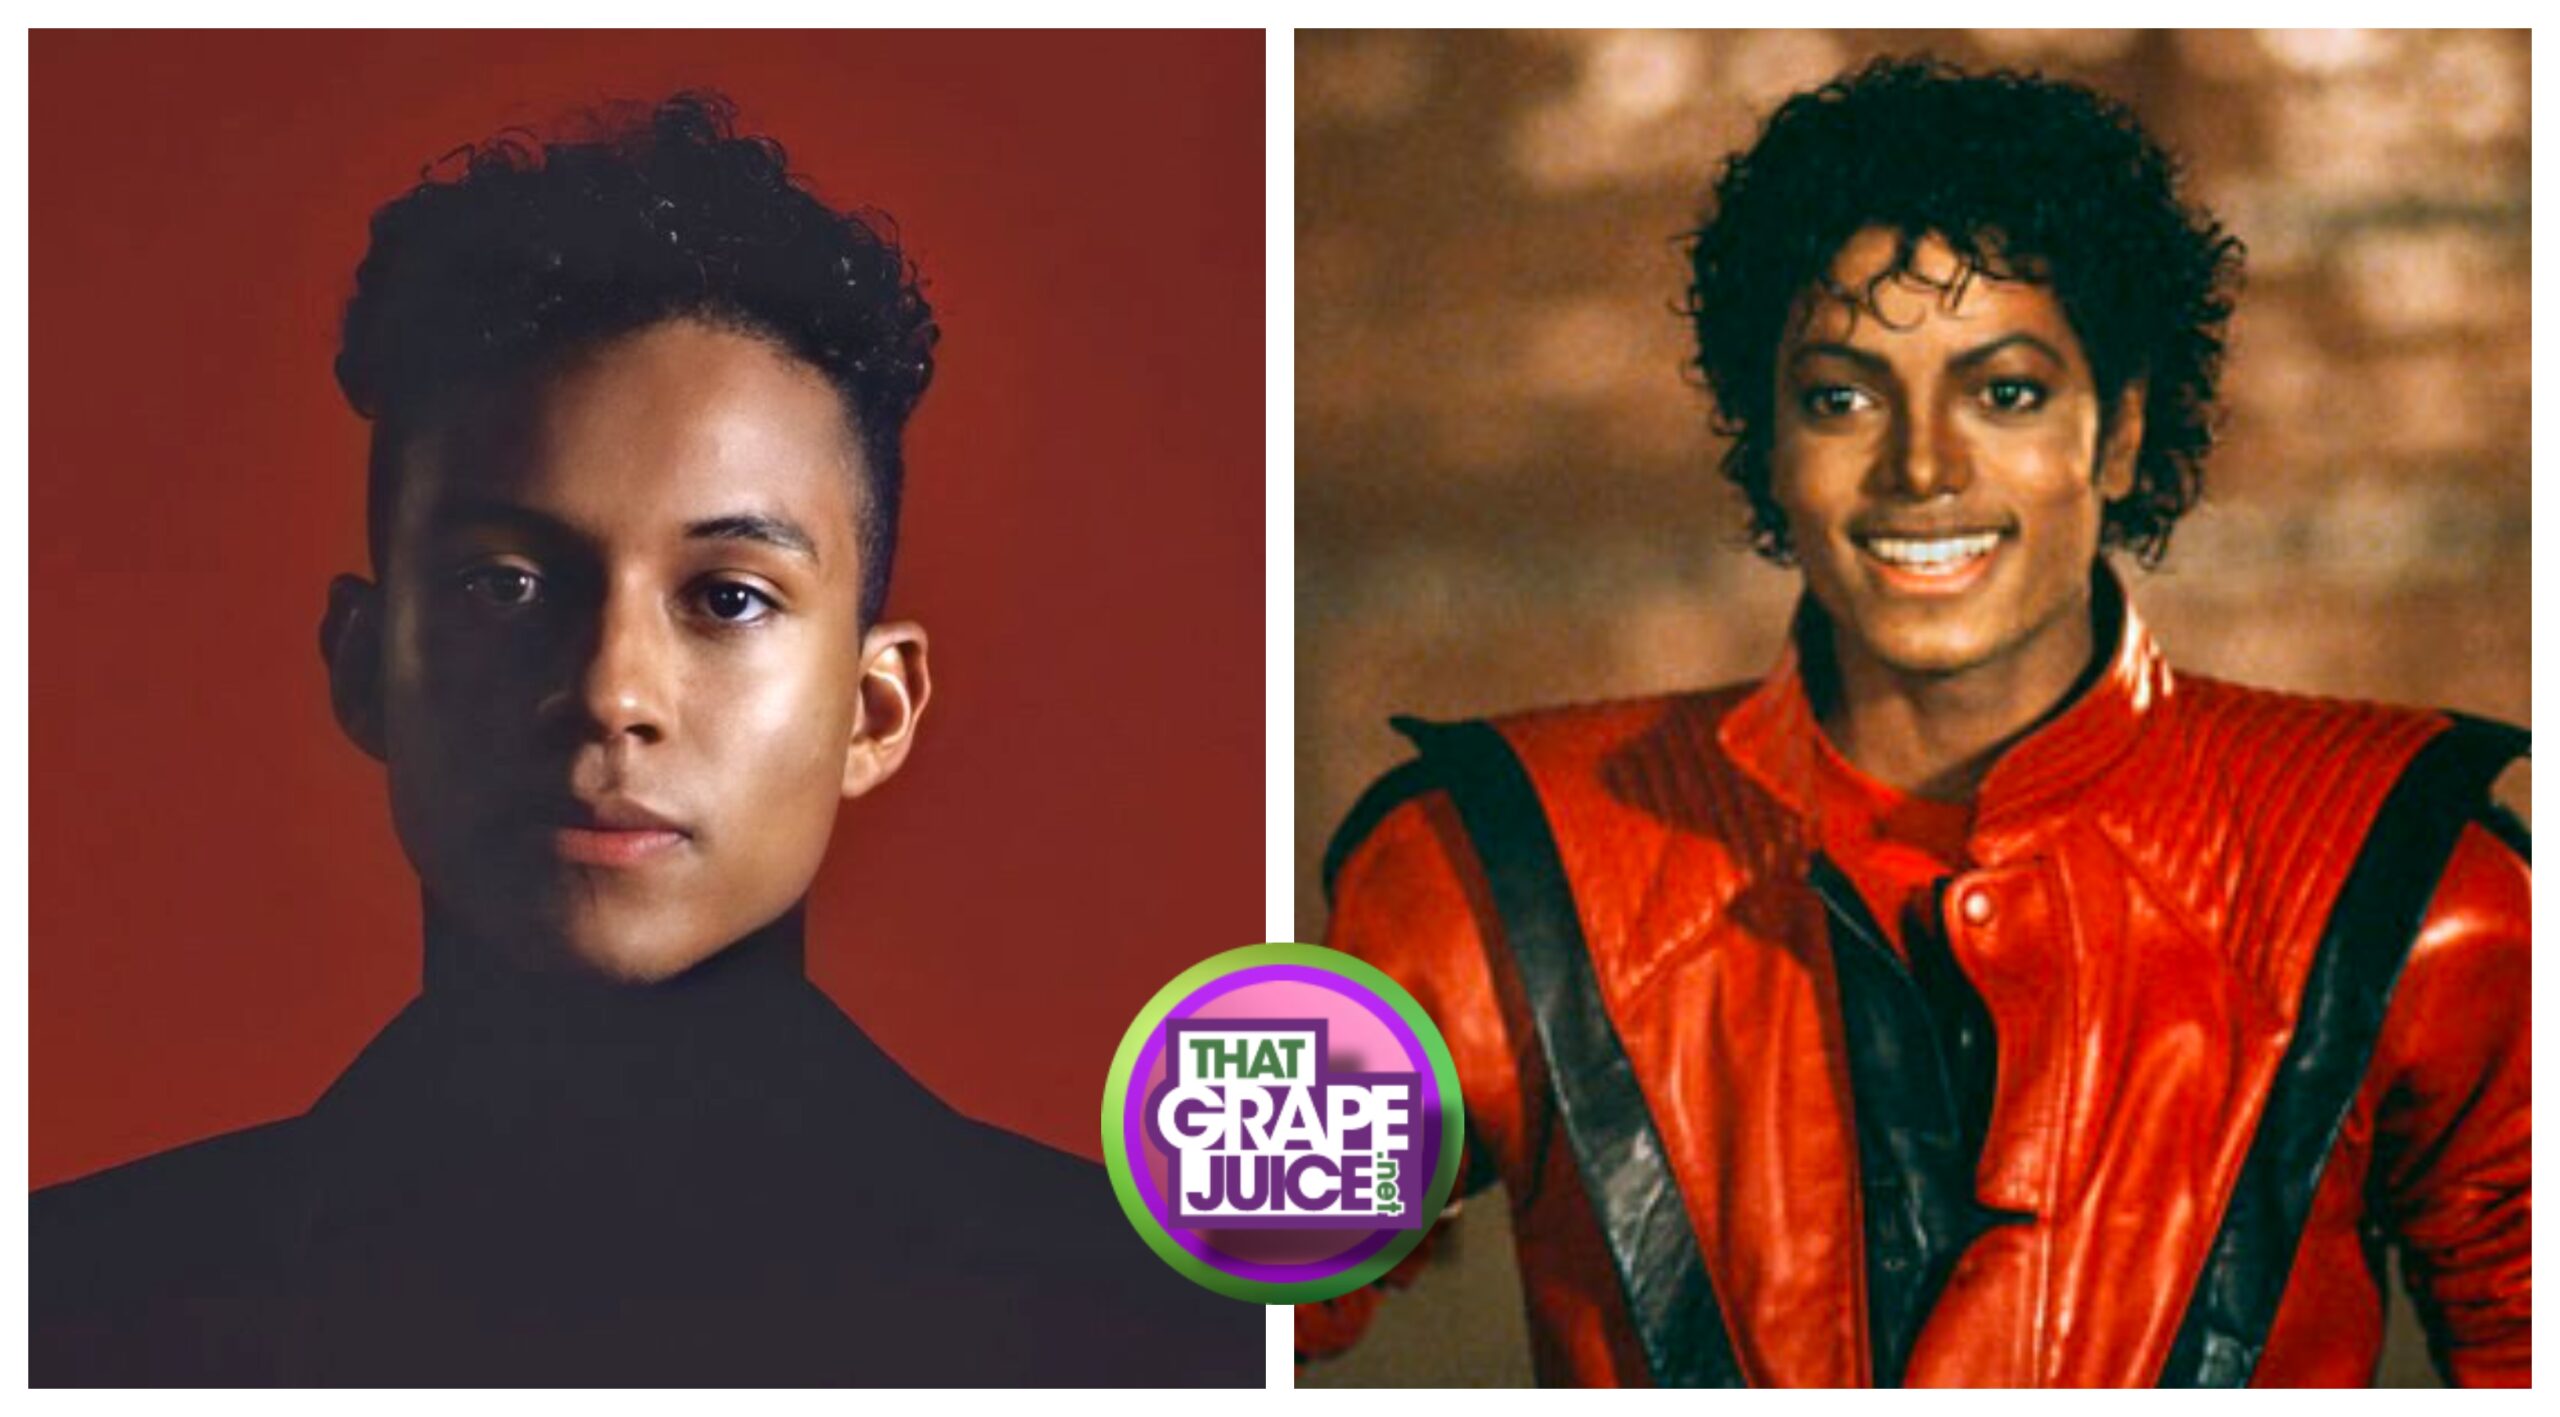 Michael Jackson's nephew to star in King of Pop biopic – The